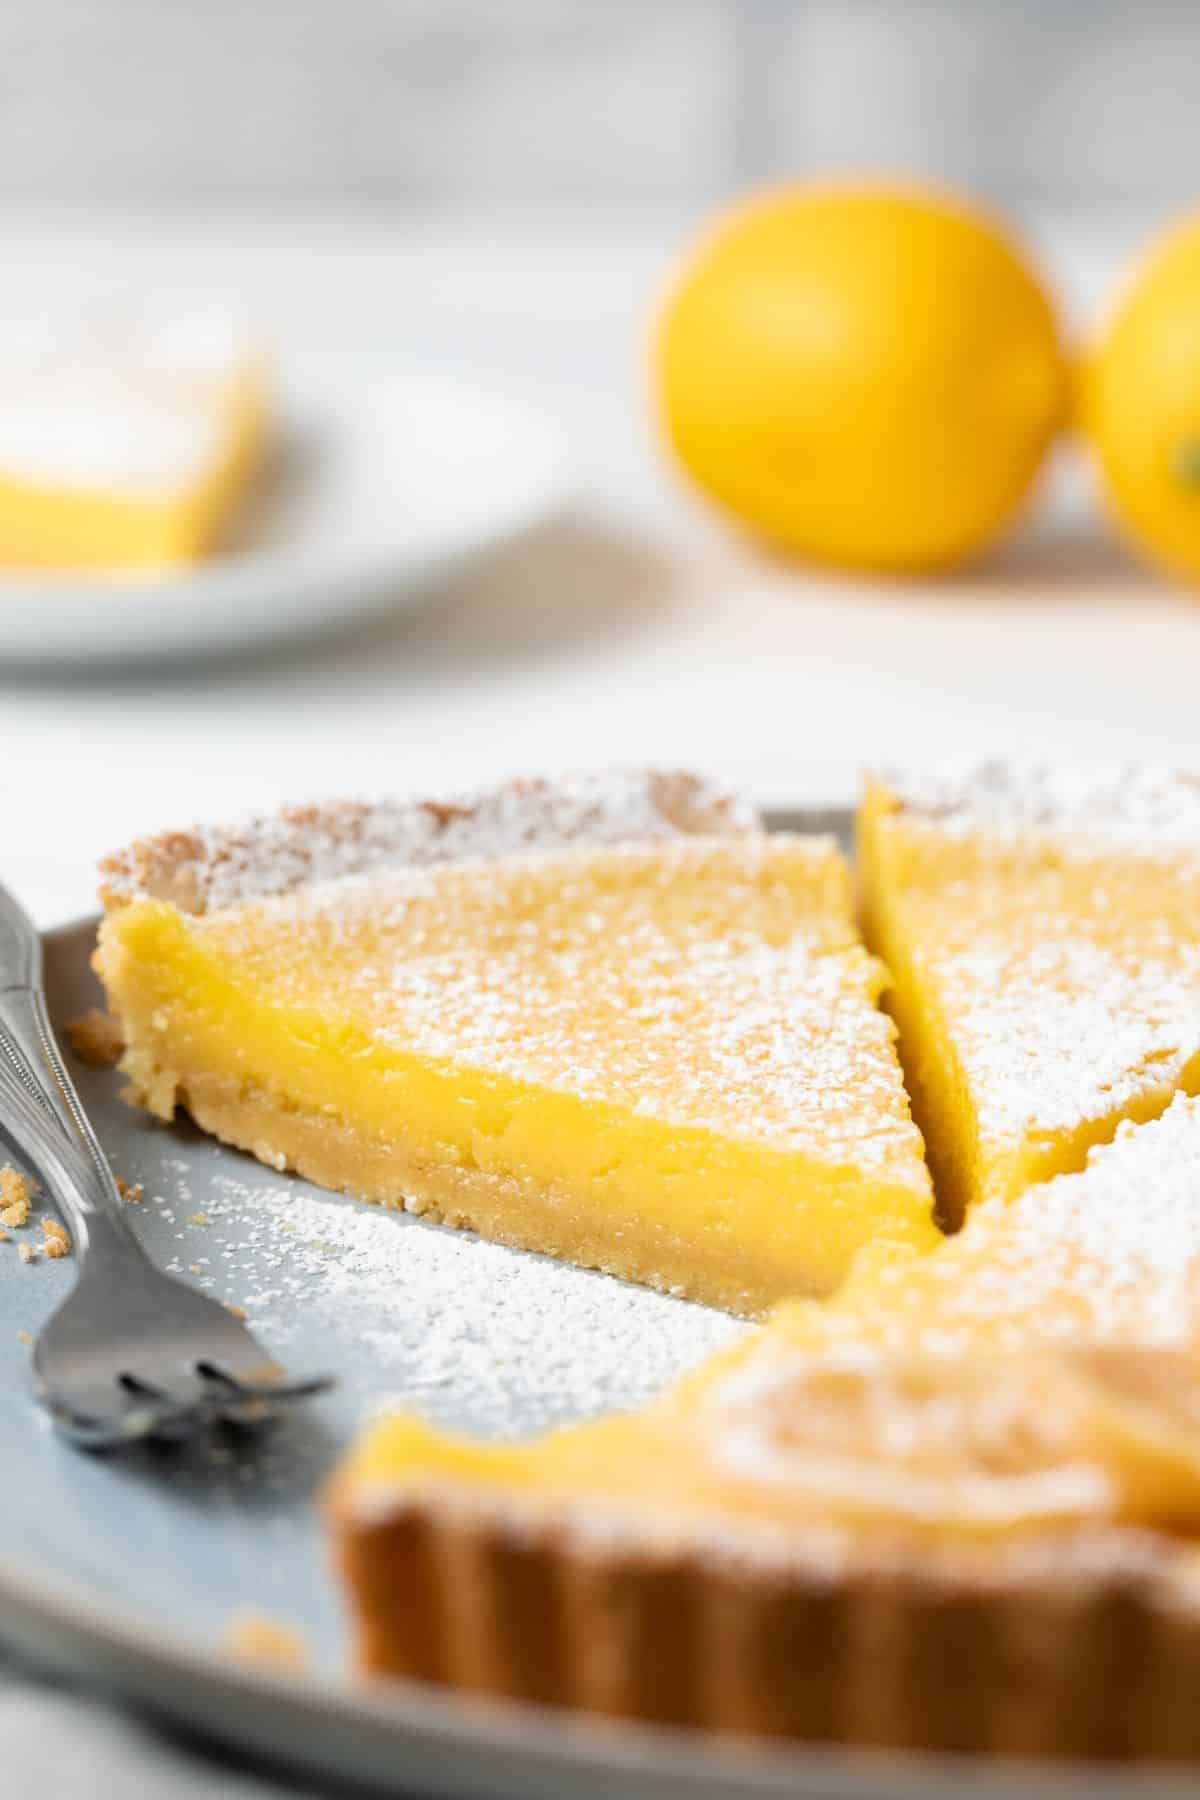 Side view of slice of lemon tart on a plate with fork.